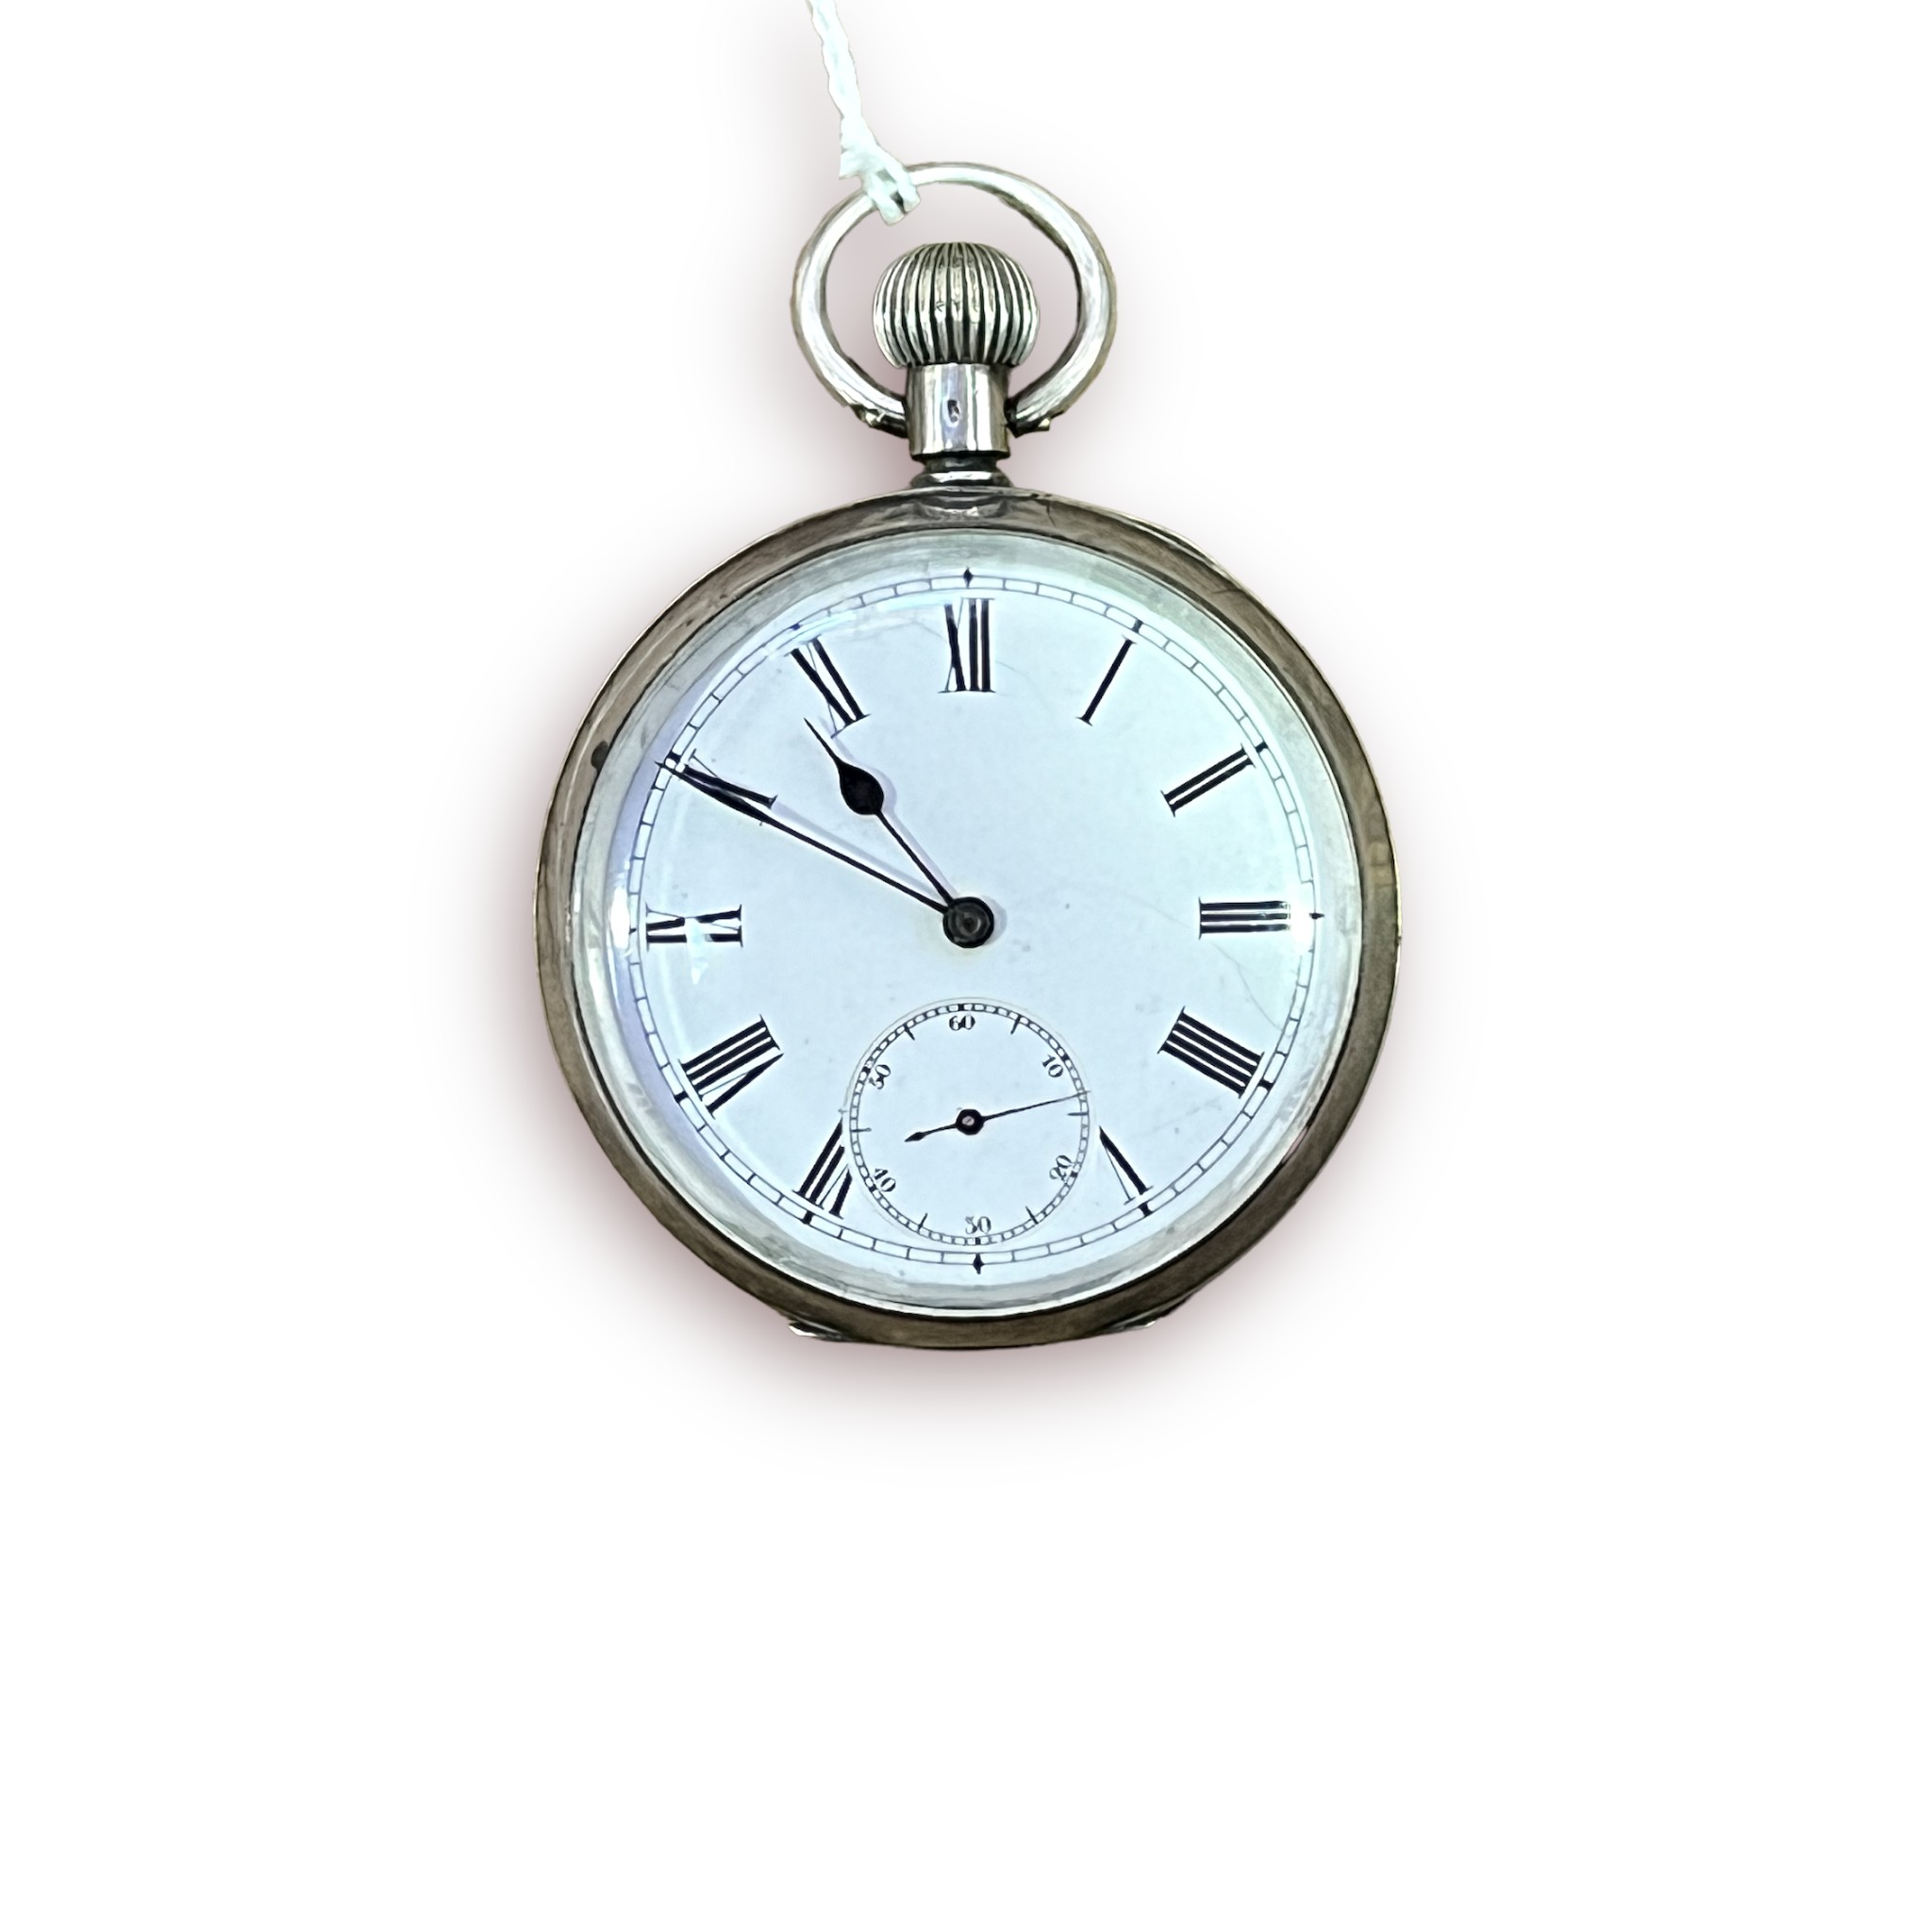 A .935 grade silver-cased, open-face pocket watch, the white enamel dial with Roman numerals